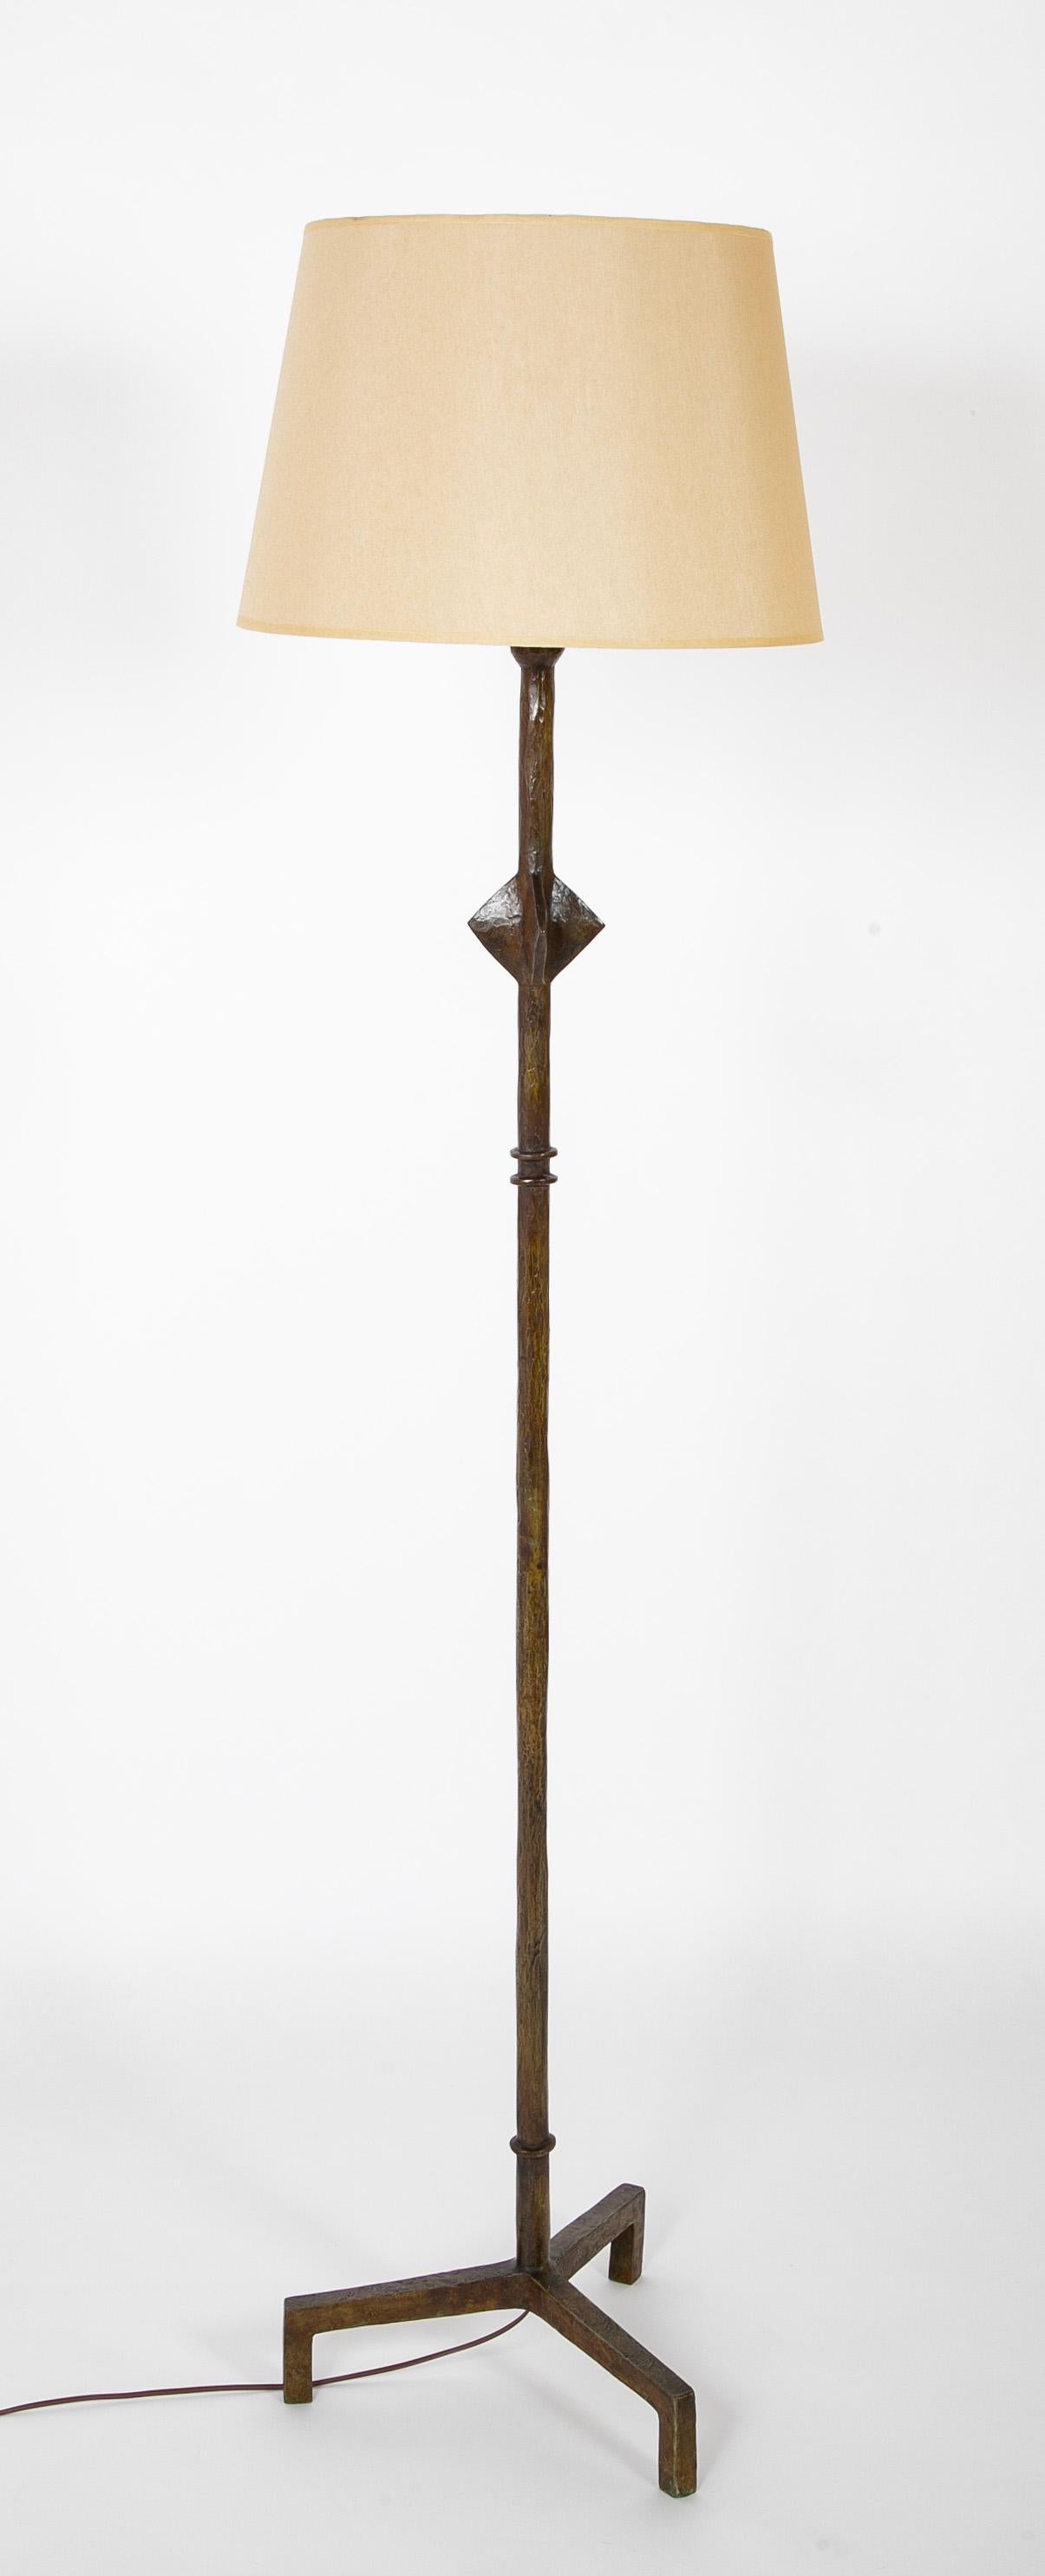 Rare ‘Modèle étoile’ patinated bronze floor lamp, after Alberto Giacometti, Heavy casting with beautiful dark green patina.

Note : Modèle étoile floor lamp was originally created by Giacometti for renowned interior designer Jean-Michel Frank